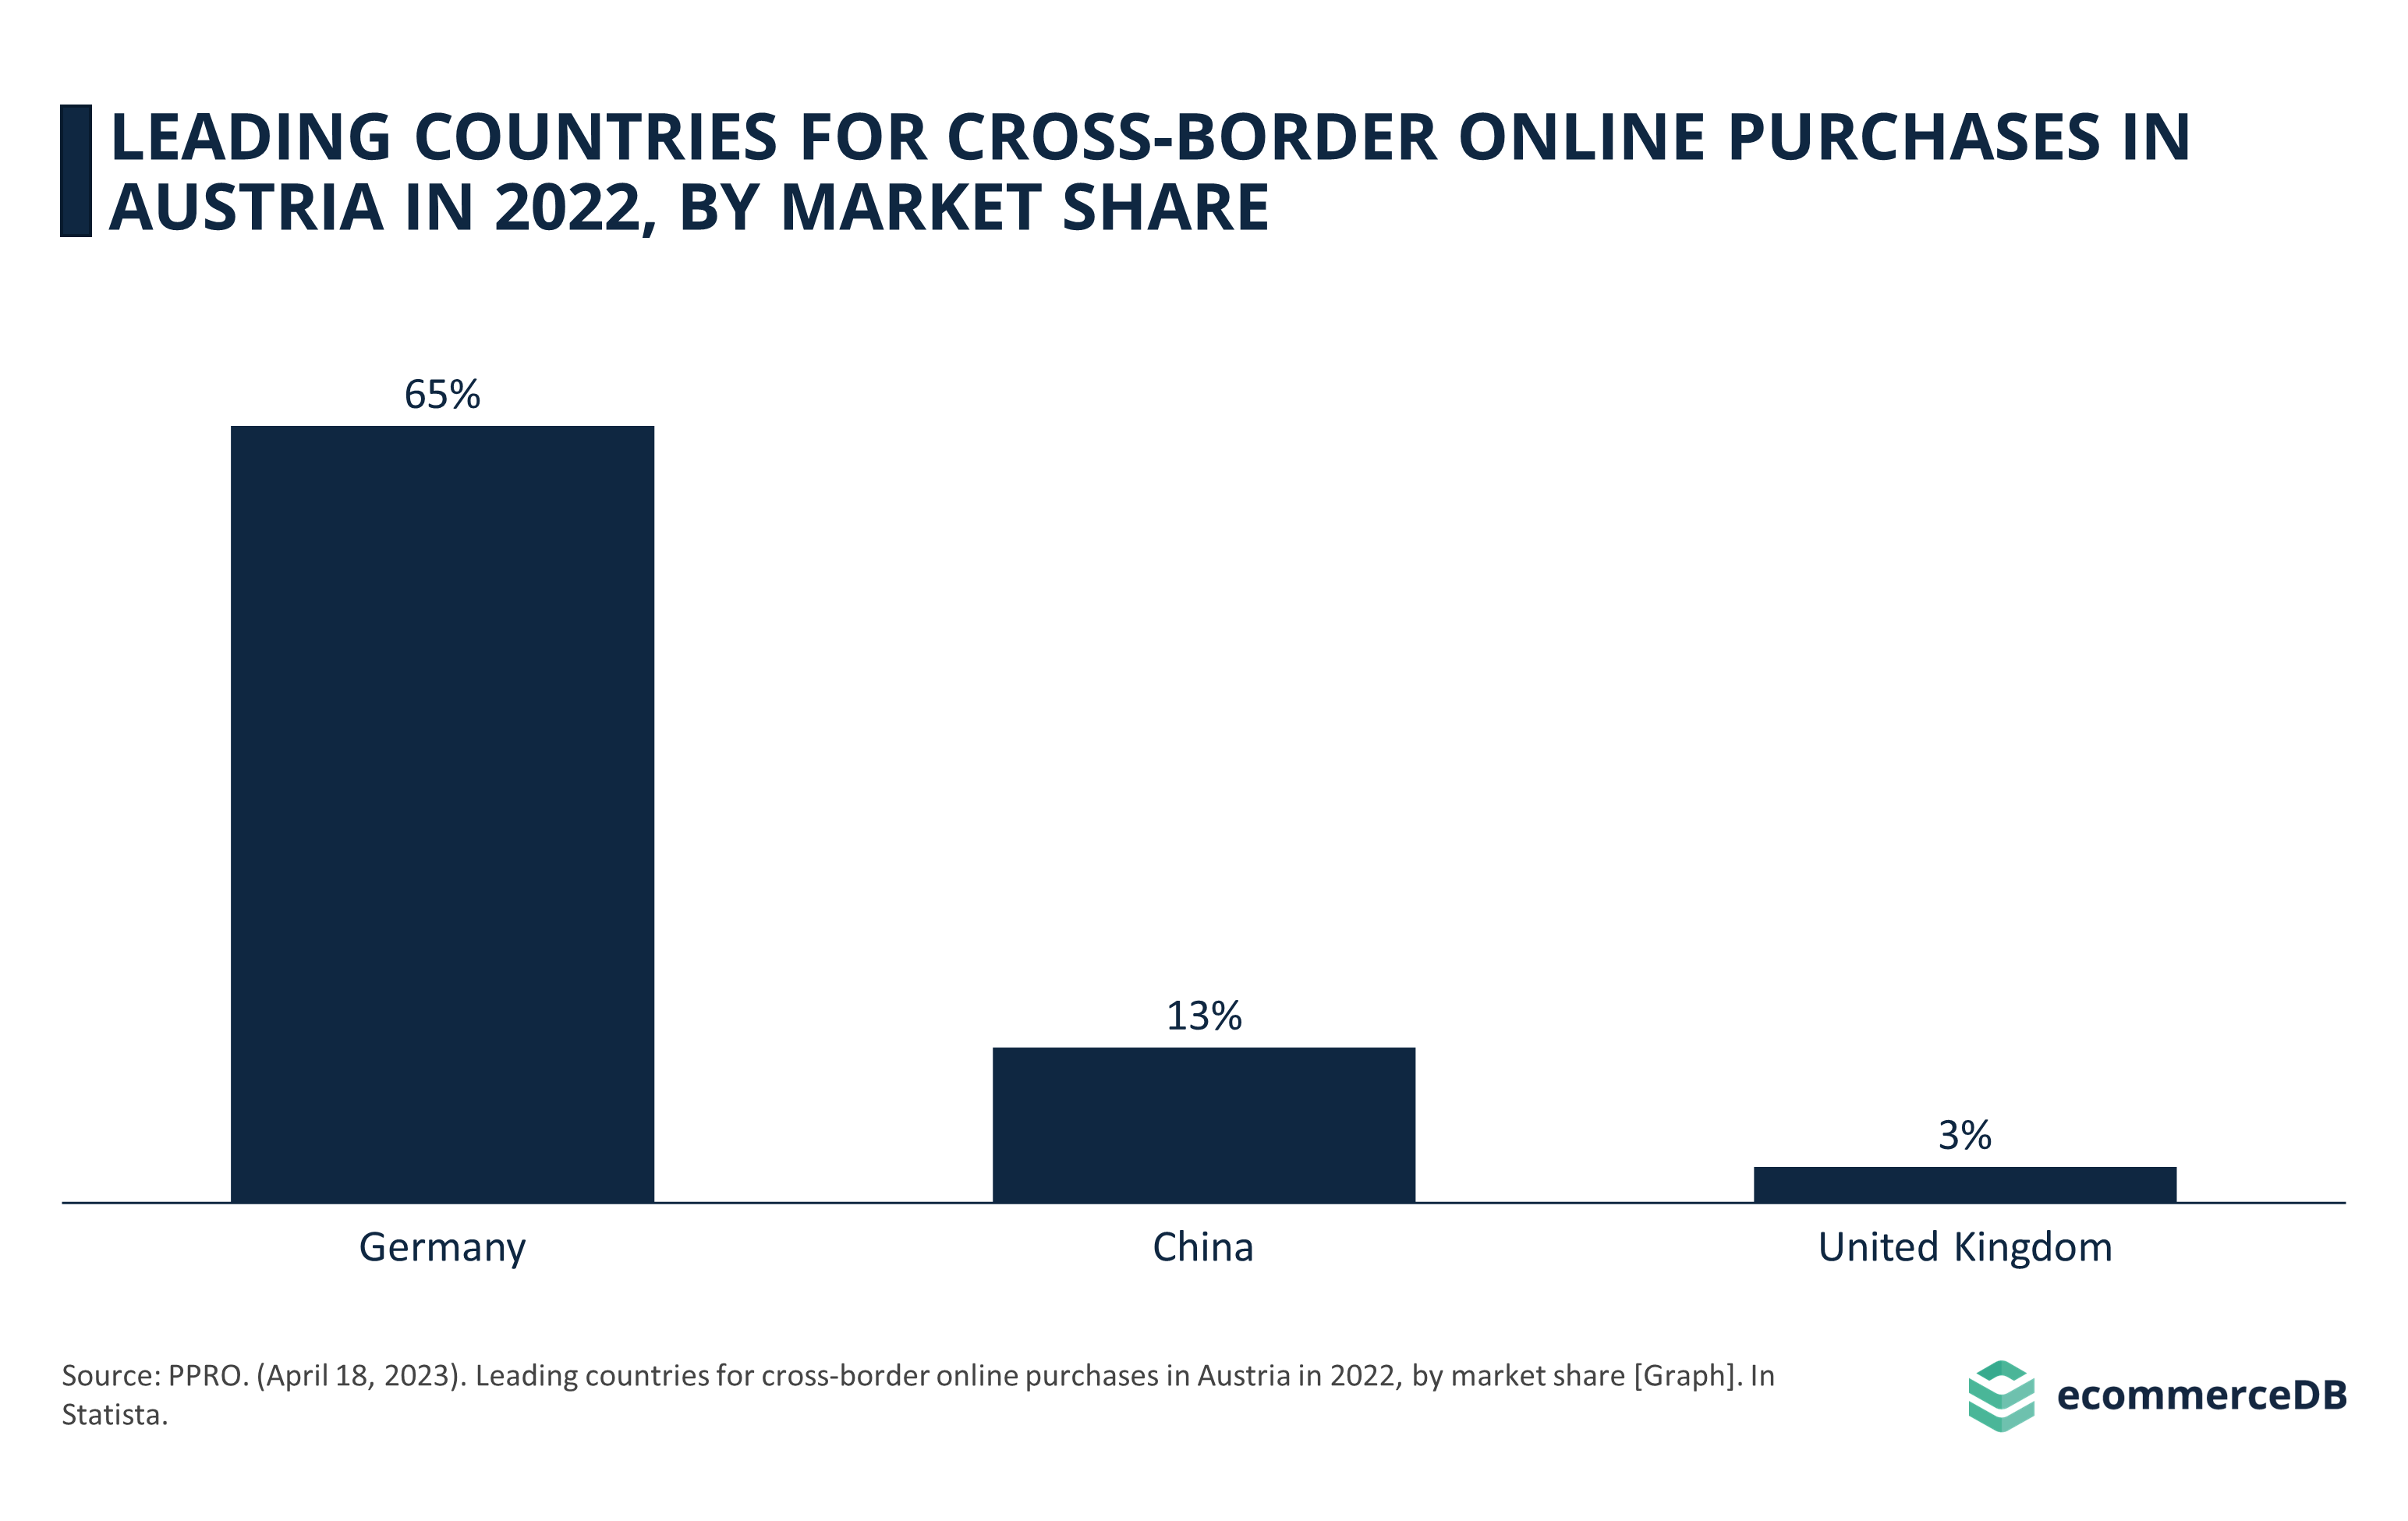 LEADING COUNTRIES FOR CROSS-BORDER ONLINE PURCHASES IN AUSTRIA IN 2022, BY MARKET SHARE